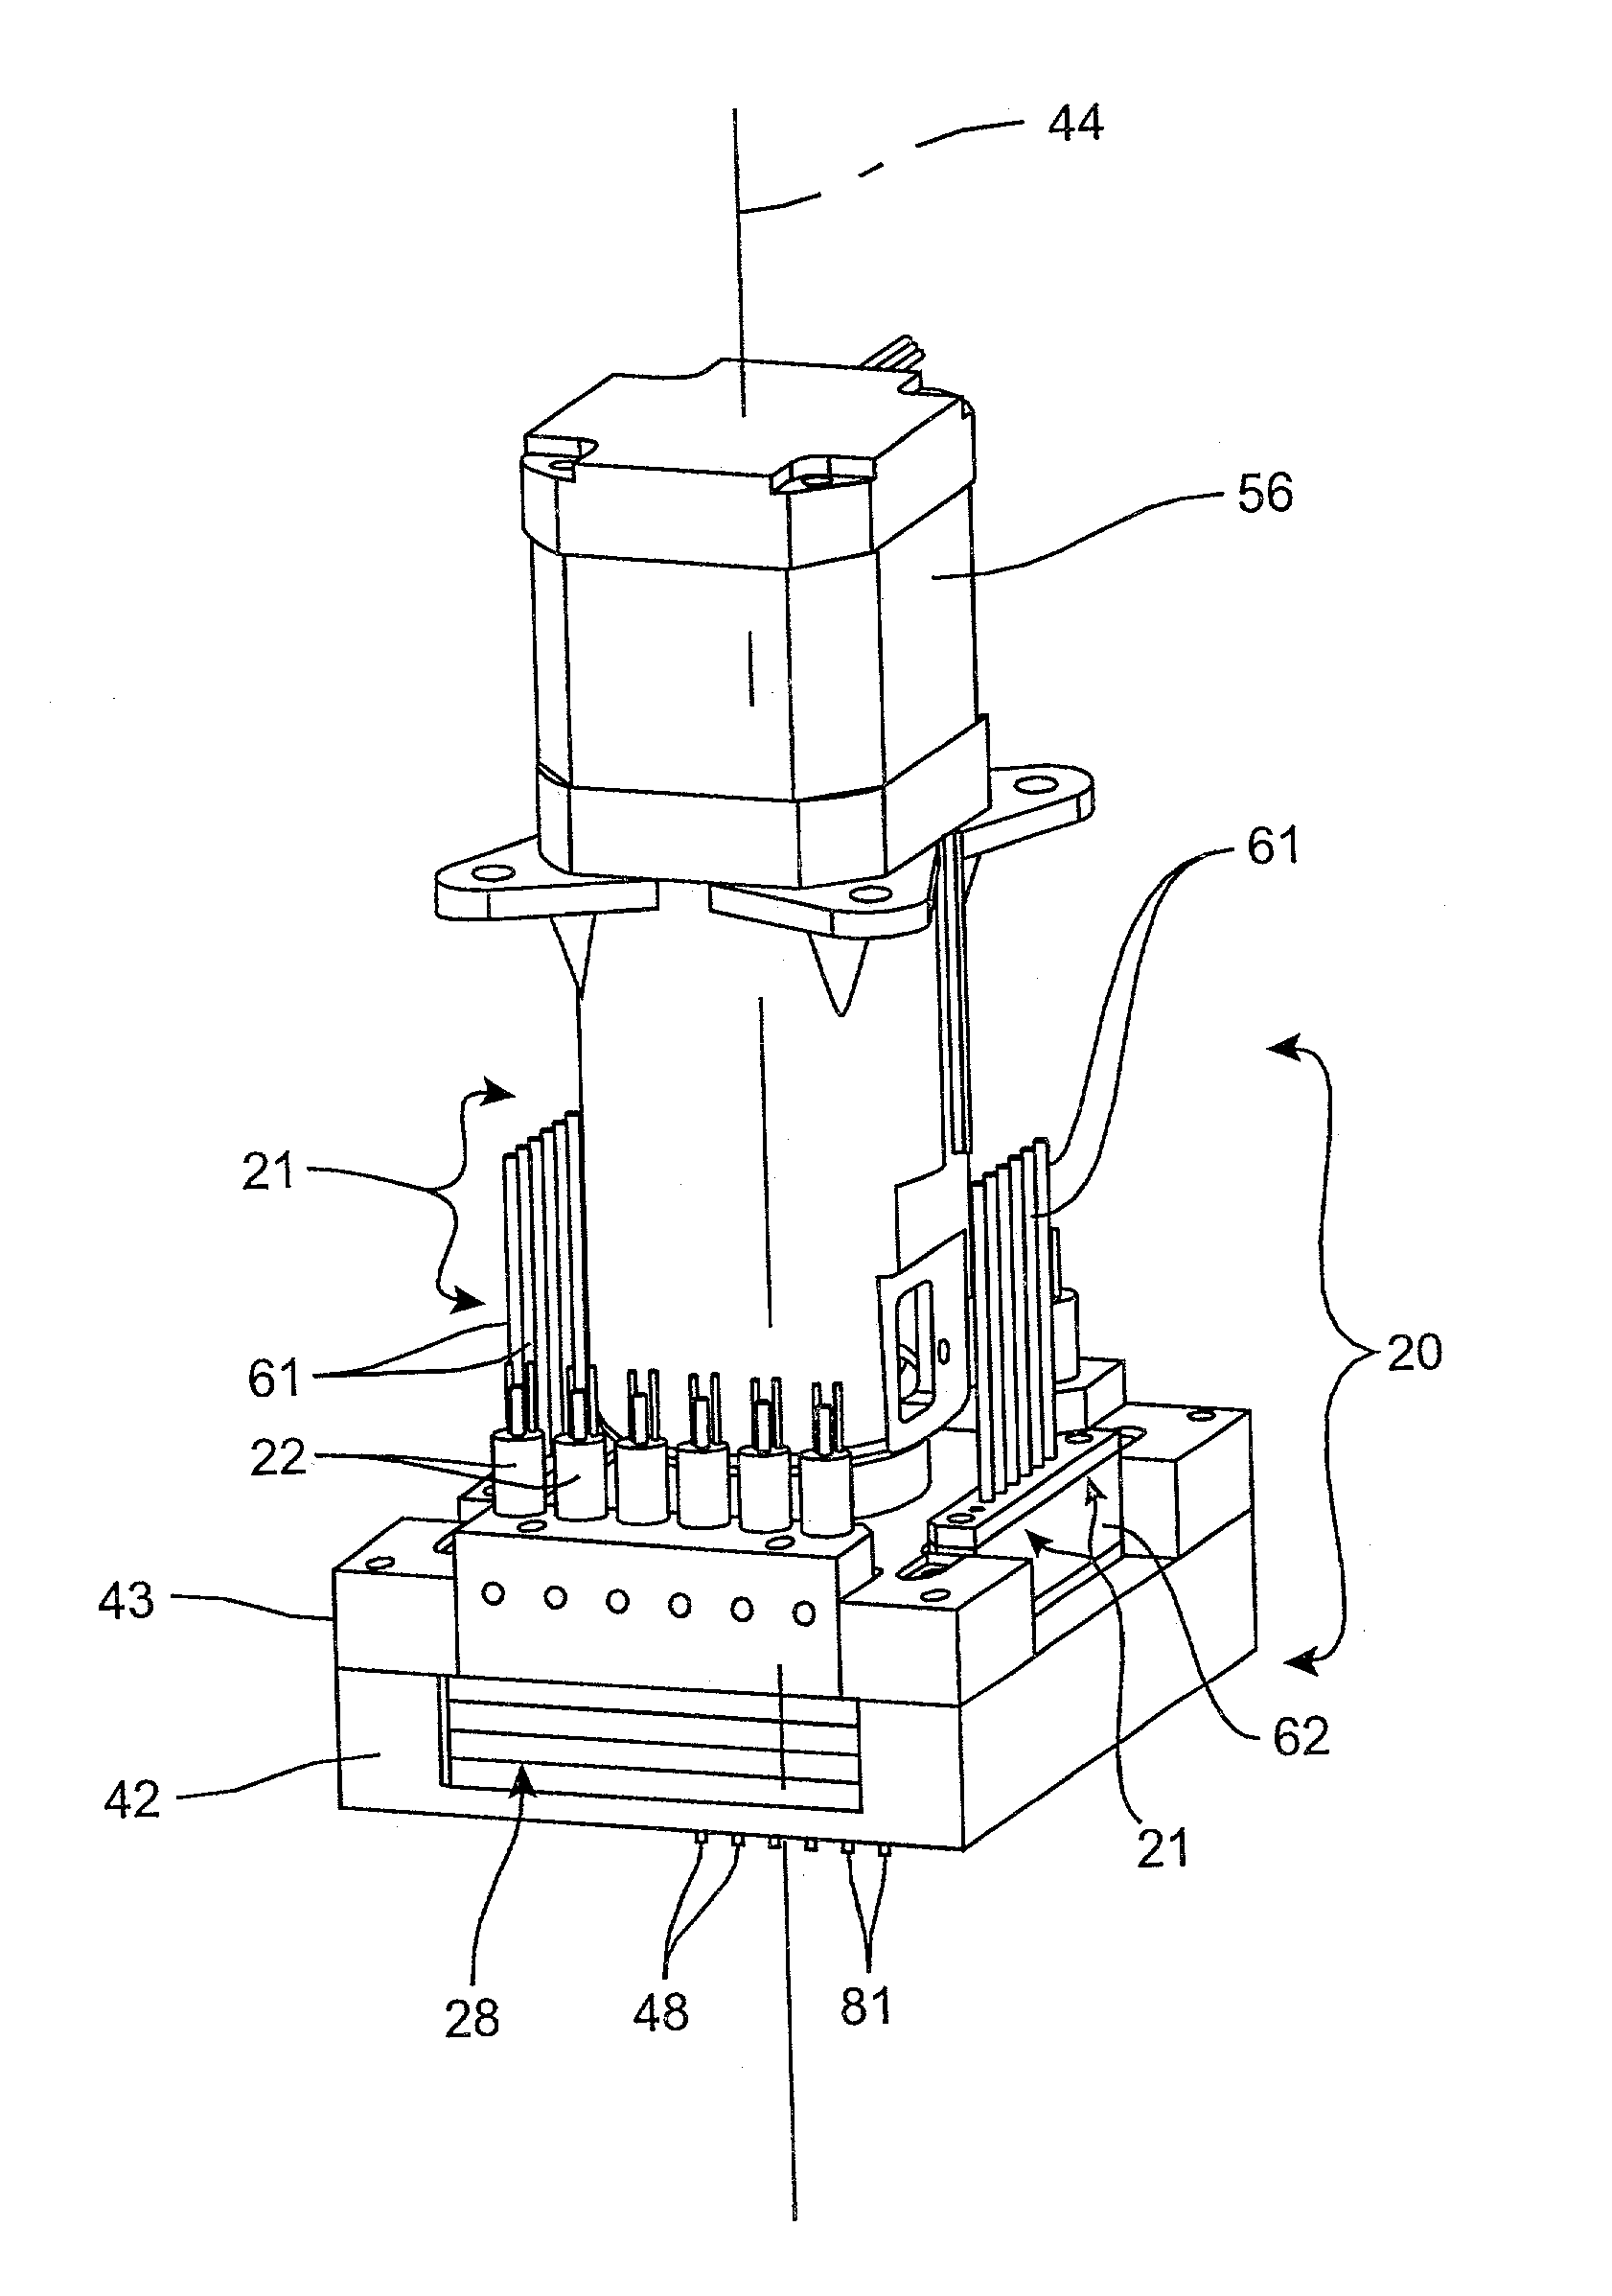 Universal non-contact dispense peripheral apparatus and method for a primary liquid handling device